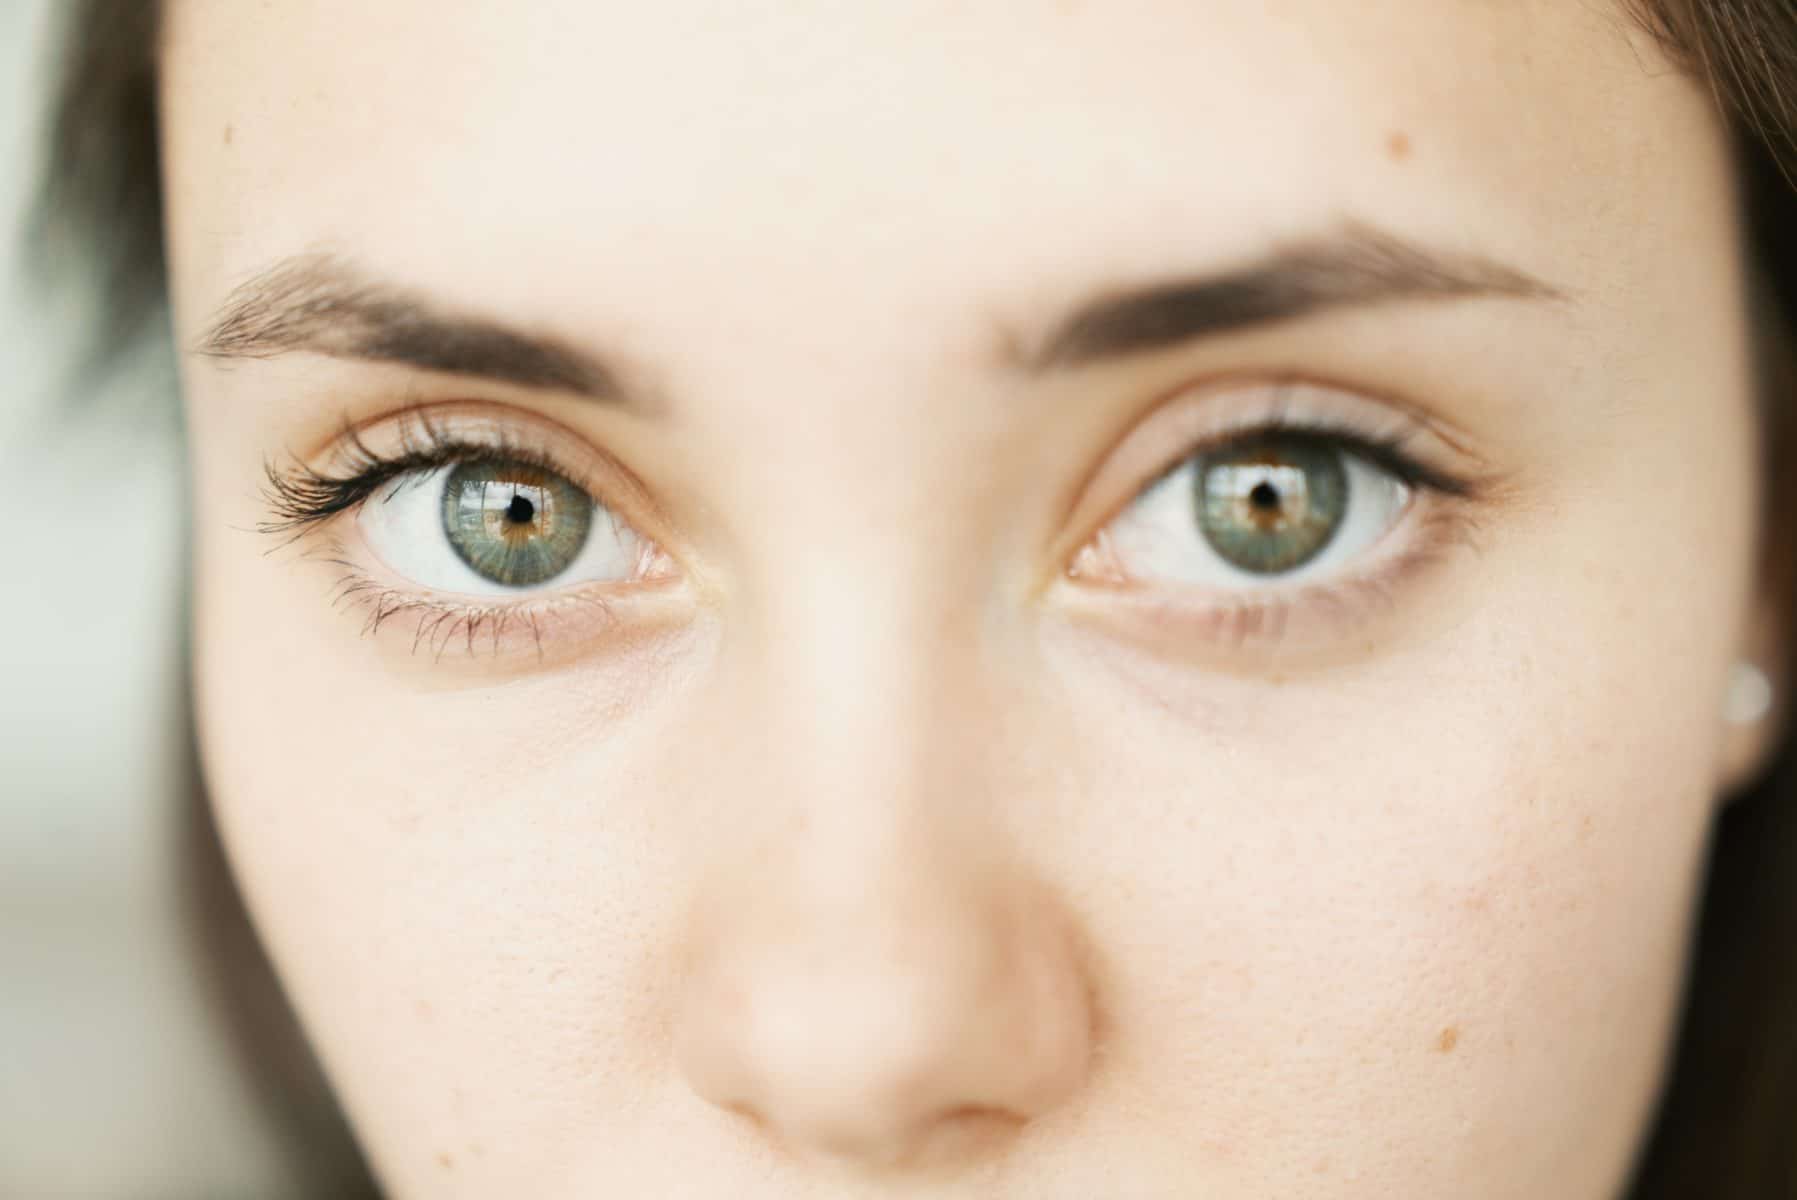 Random facts about eyes: The area between your eyes is called the glabella. You have about 500 hairs in your eyelashes. More than 60 percent of the population uses corrective lenses.